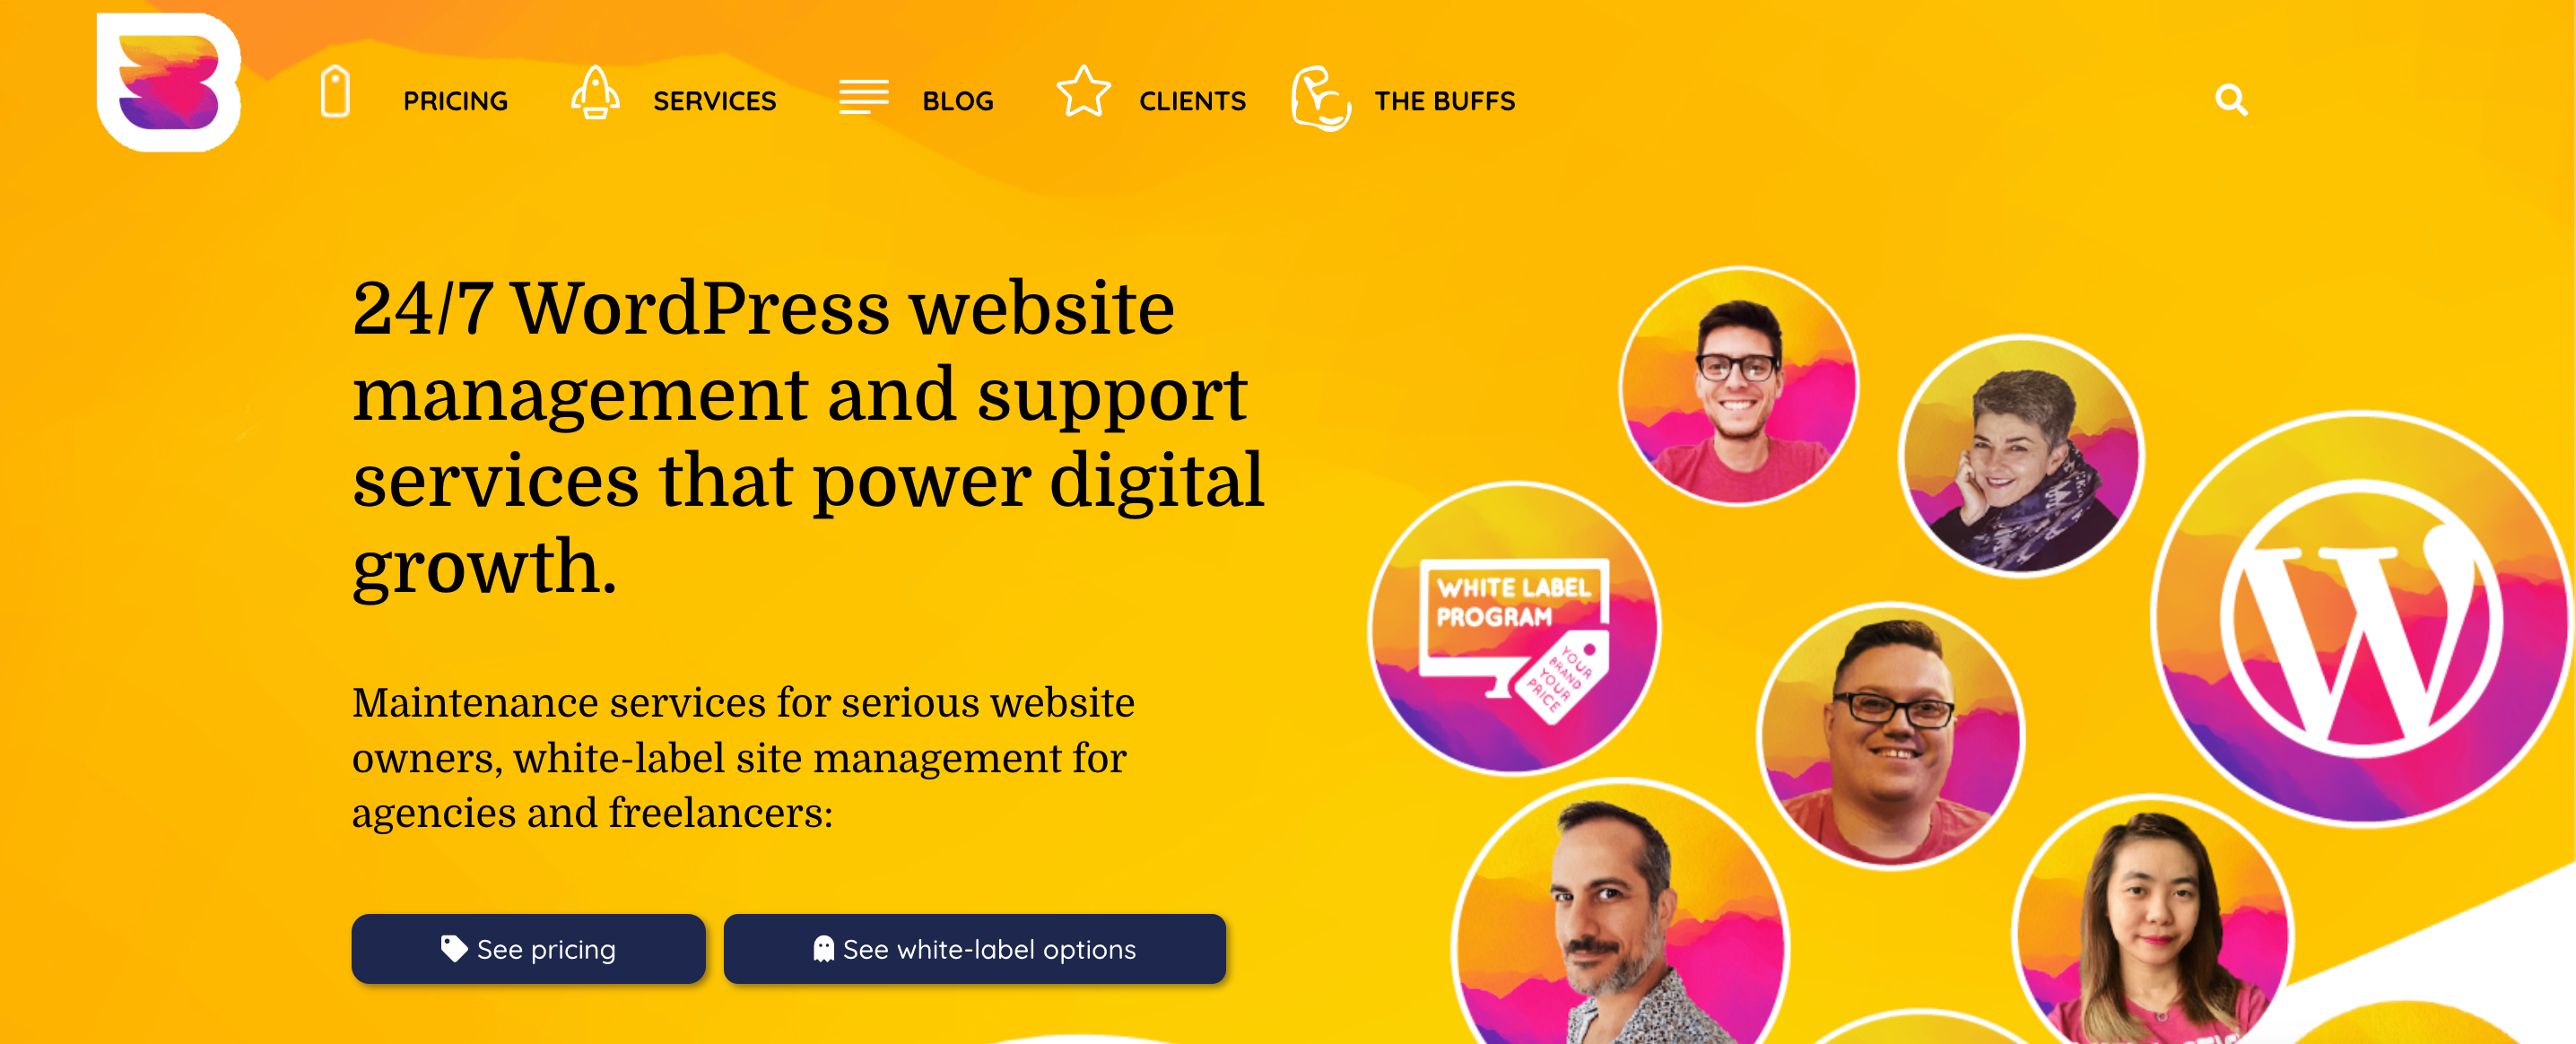 WP Buffs offers maintenance services for WordPress sites, some of their packeges include solution for slow WordPress site loads.